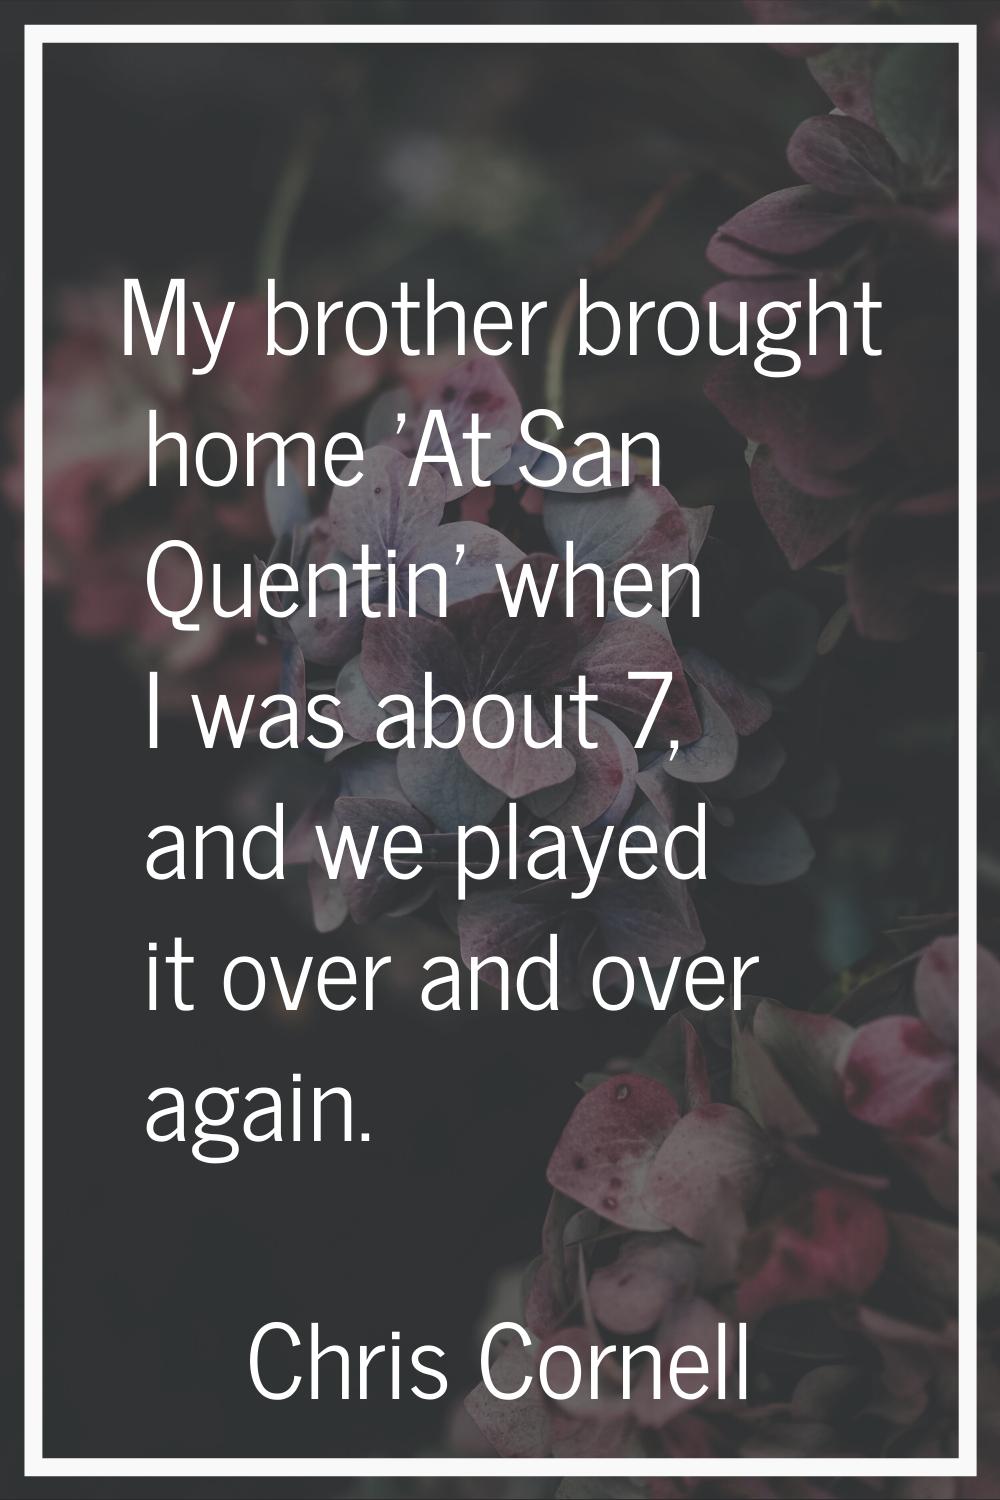 My brother brought home 'At San Quentin' when I was about 7, and we played it over and over again.